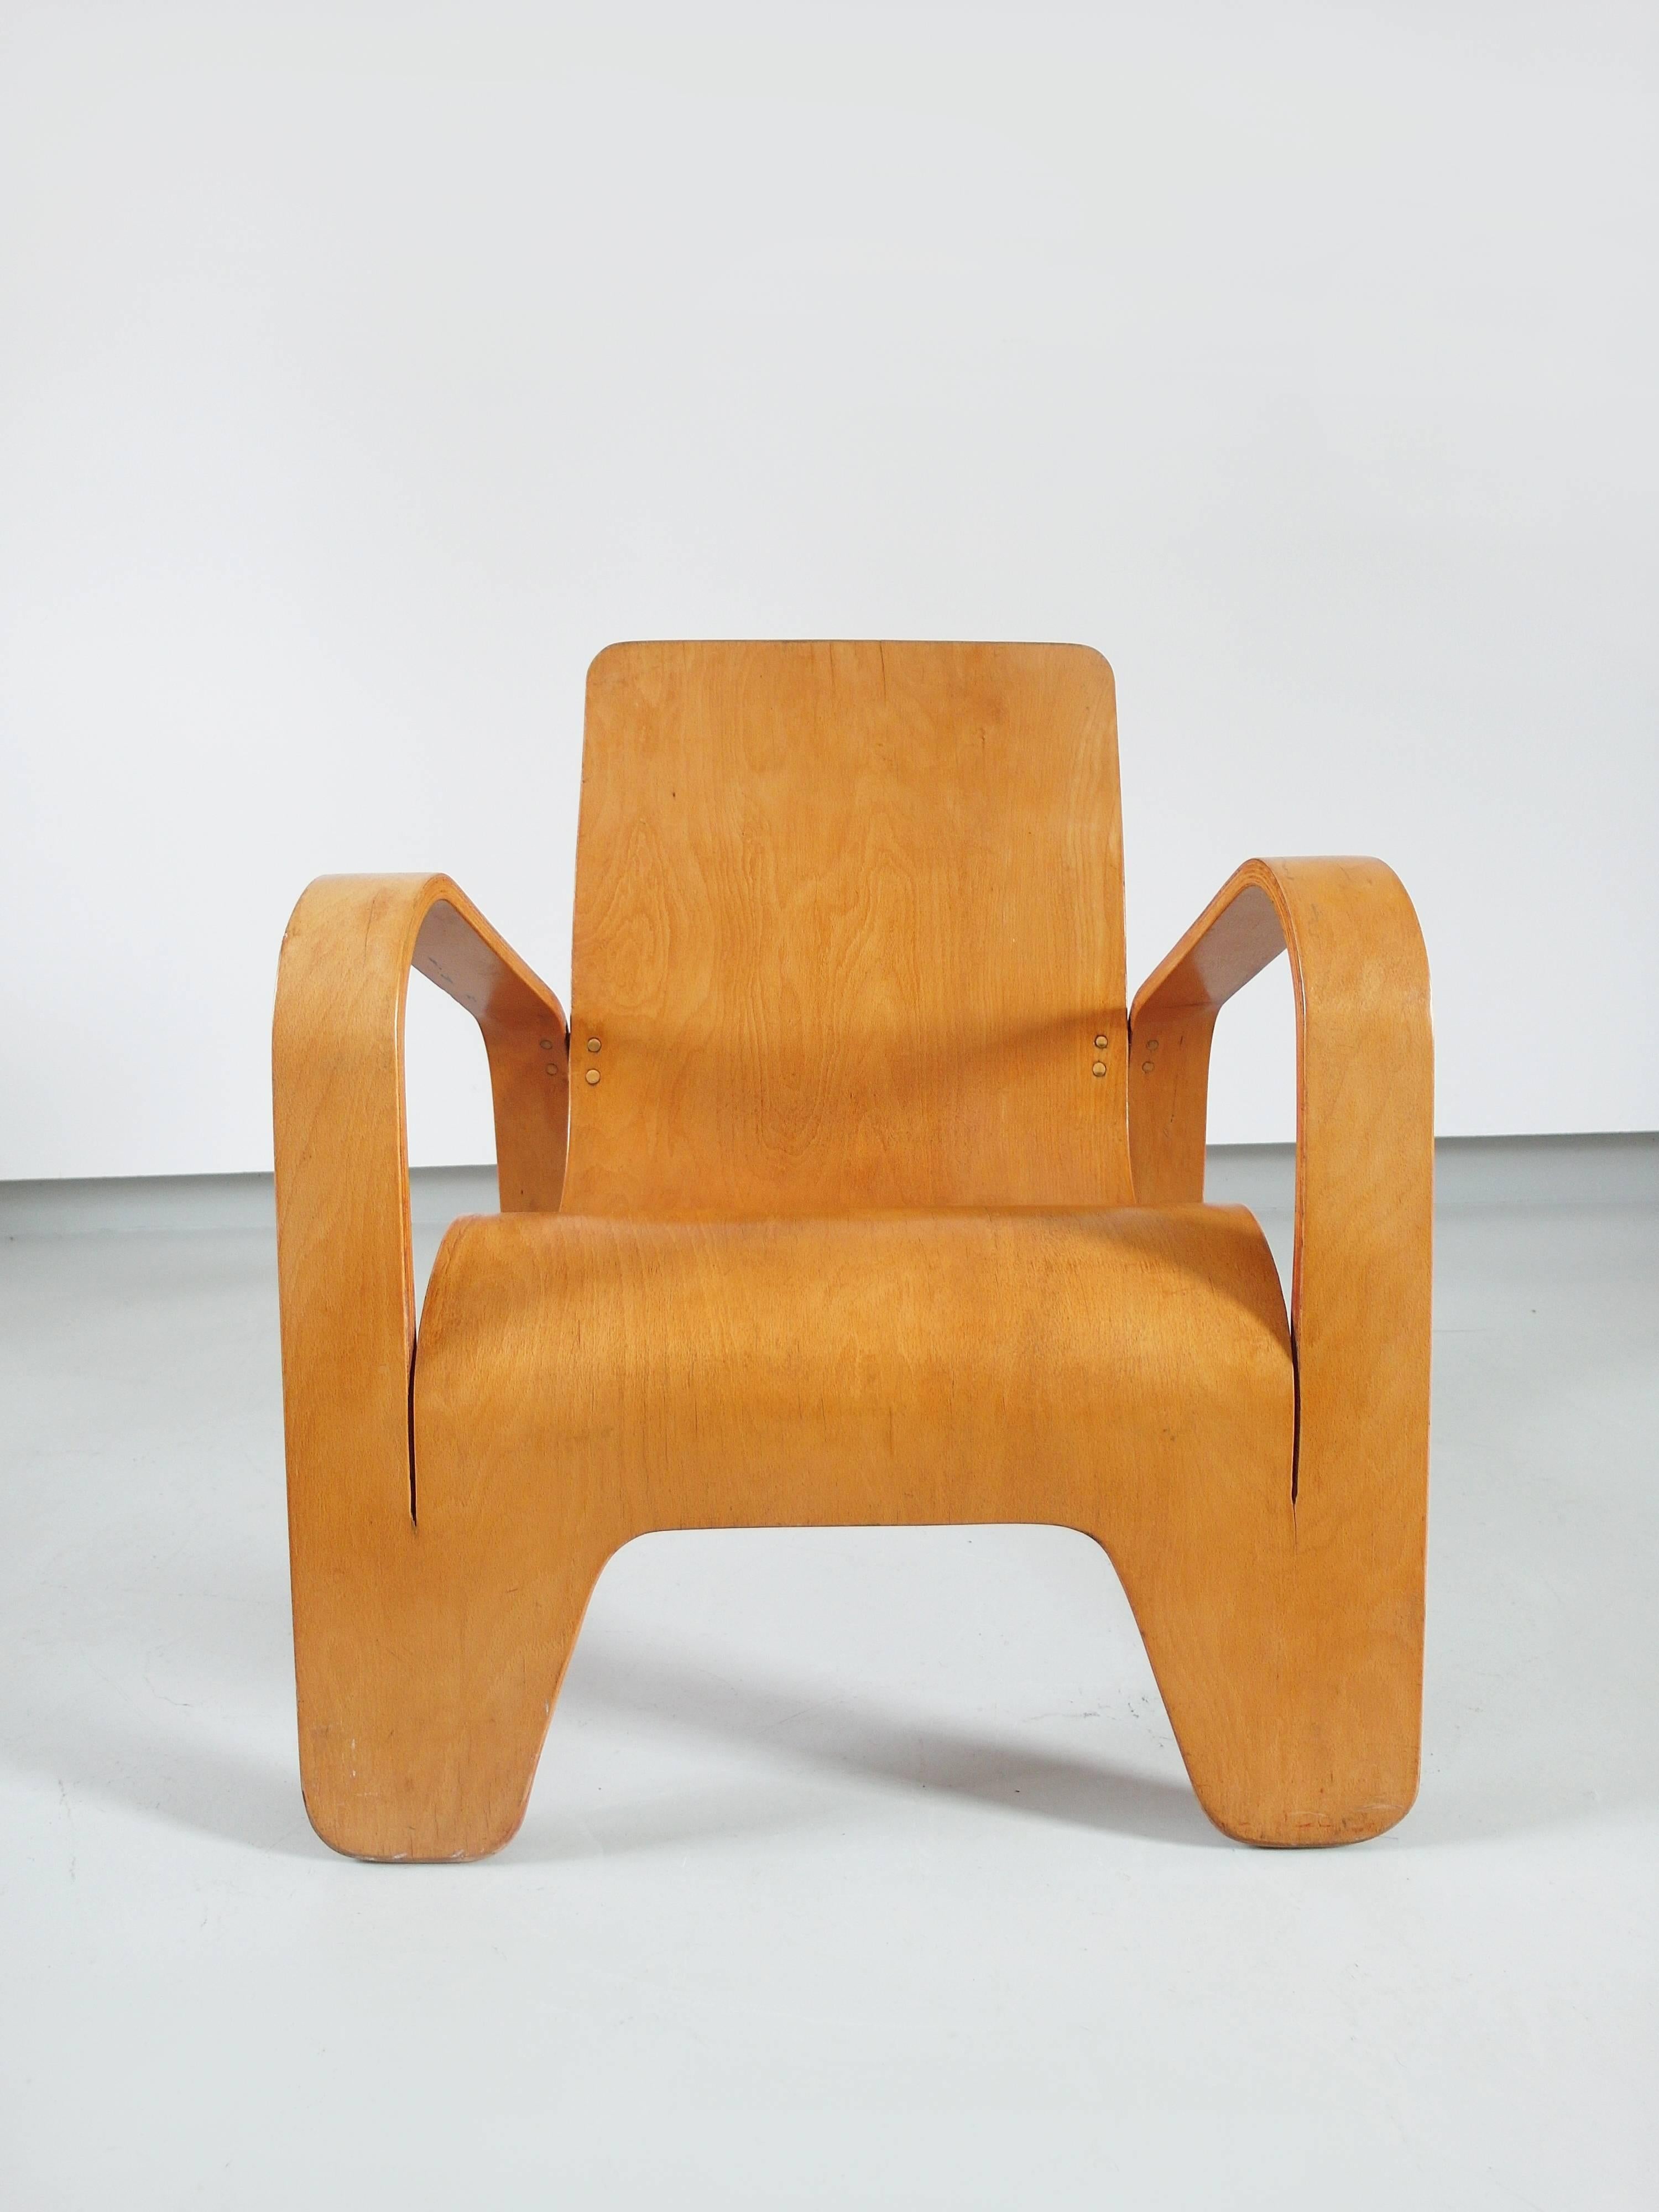 Mid-20th Century Important Dutch Modernist Lawo Lounge Chair by Han Pieck for Lawo Ommen, 1946